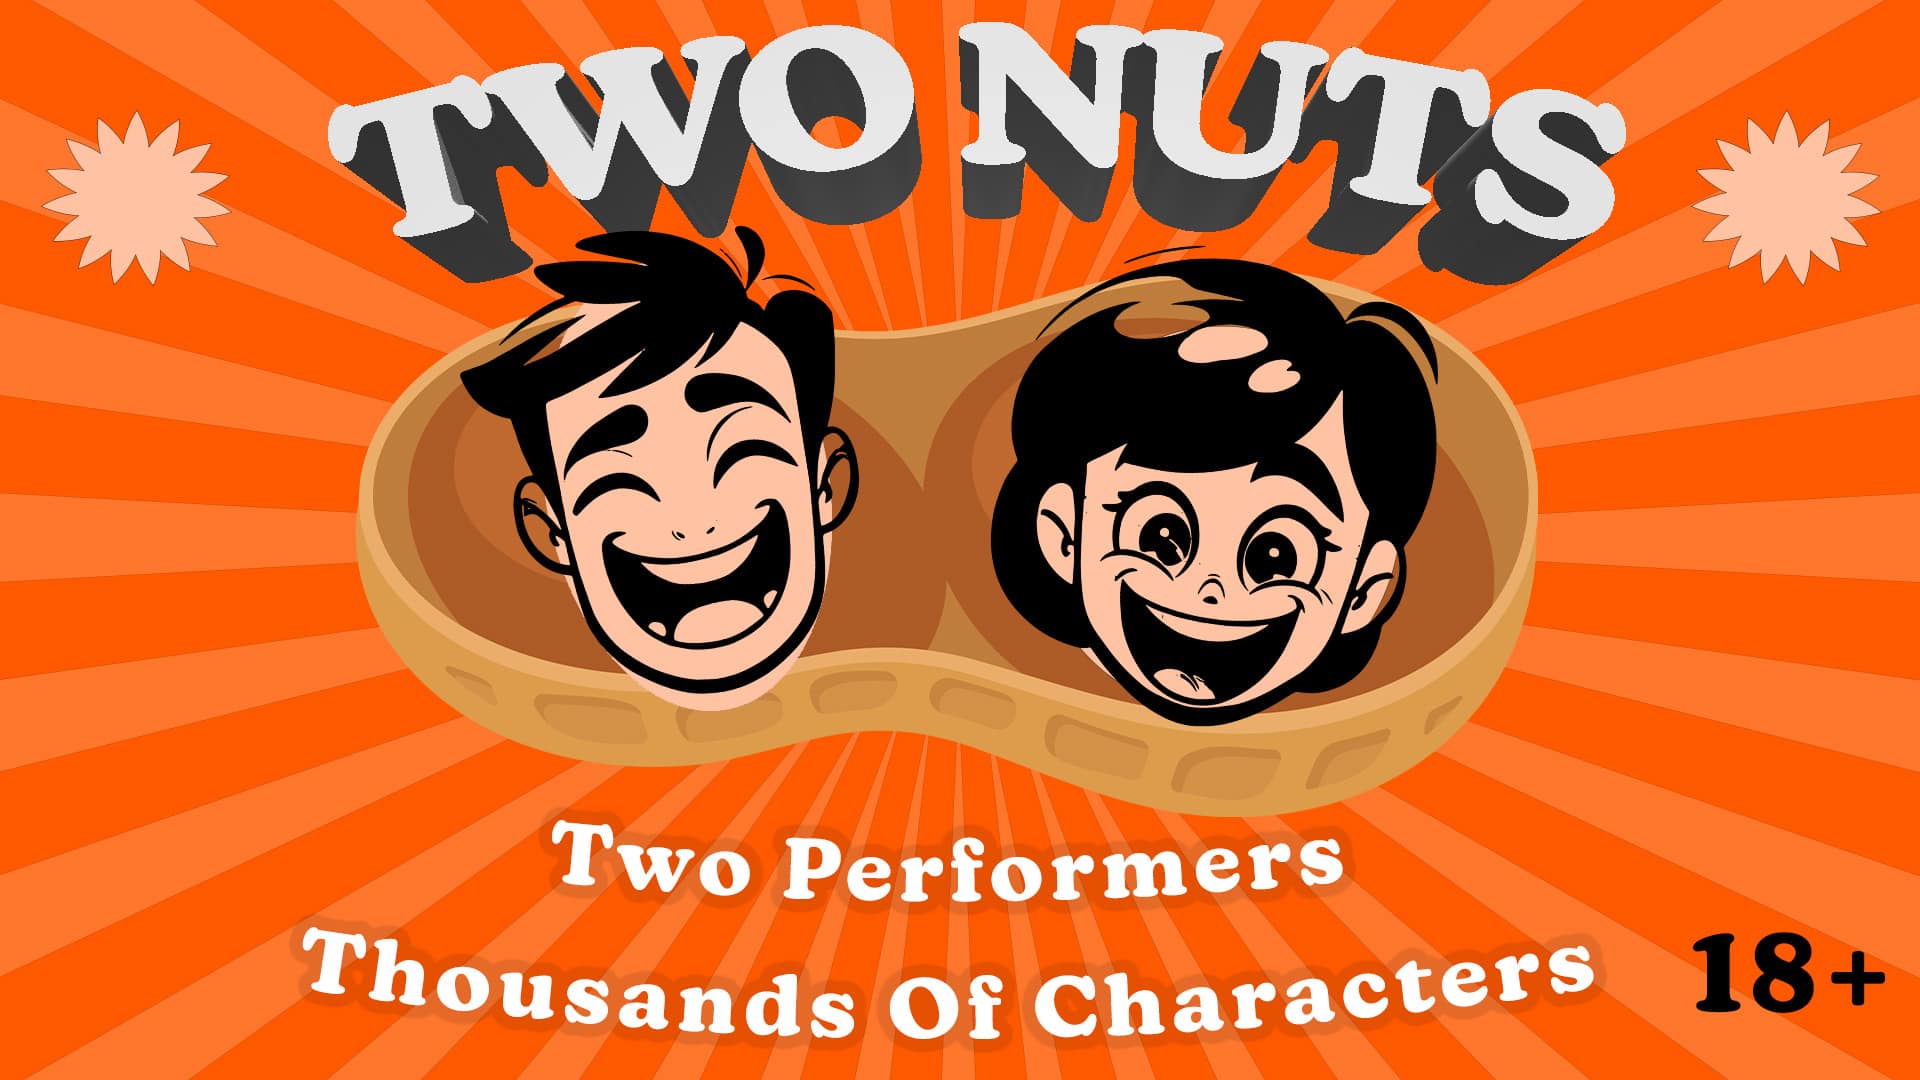 two cartoon-looking characters laughing promoting improv comedy